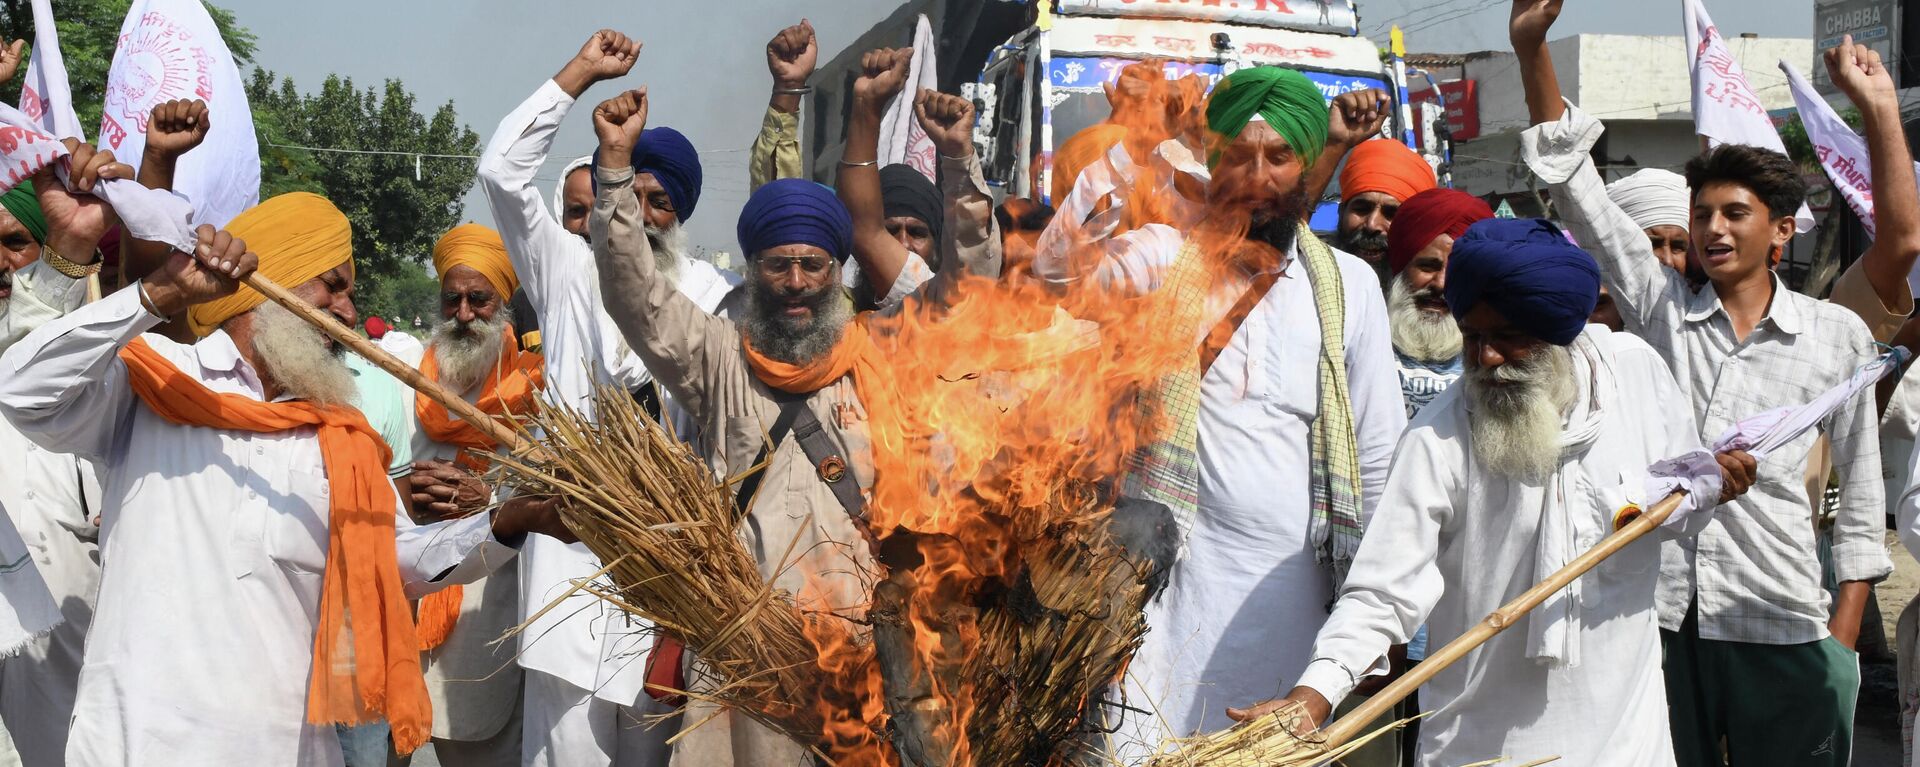 Farmers shout slogans as they burn an effigy of India's Prime Minister Narendra Modi and Uttar Pradesh state Chief Minister Yogi Adityanath during a protest on the outskirts of Amritsar on October 6, 2021, days after 9 people died in violent clashes during a farmers protest in Lakhimpur Kheri district in Utta Pradesh - Sputnik International, 1920, 25.10.2021